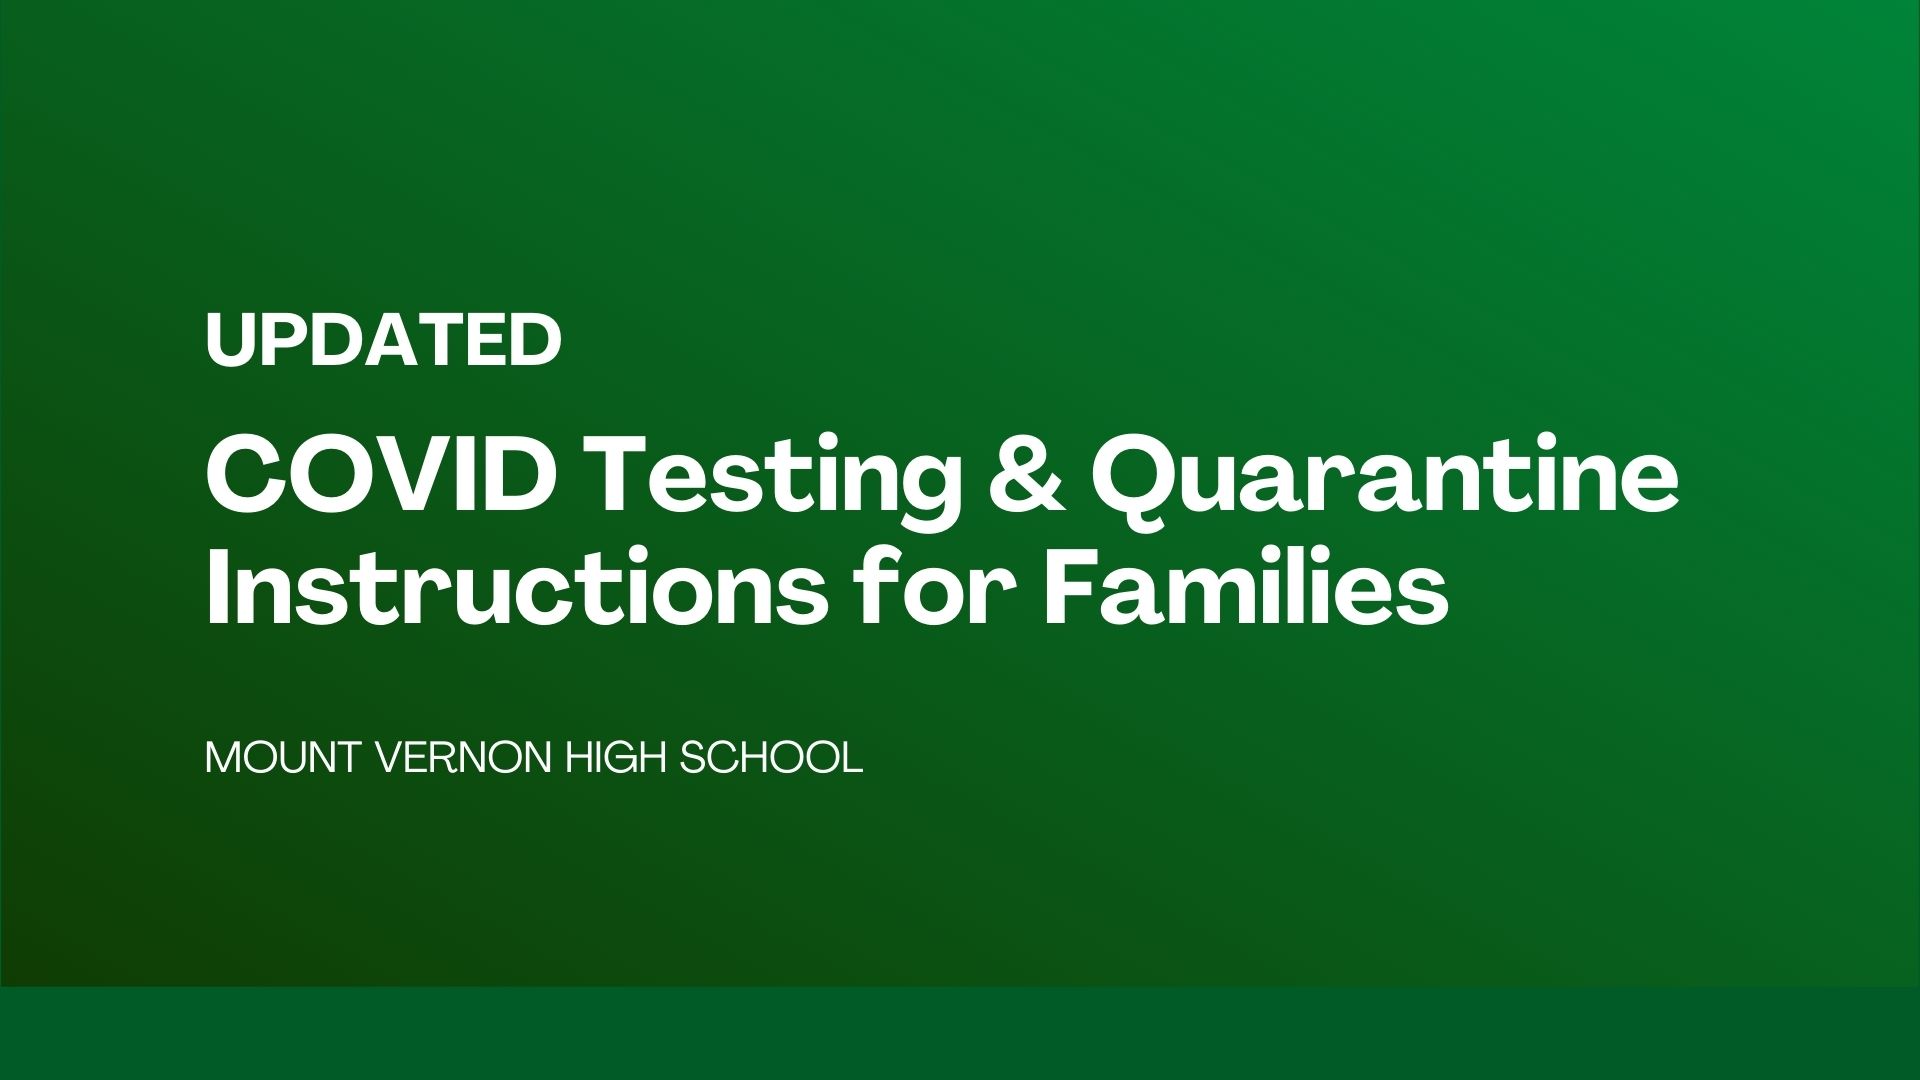 UPDATED Covid testing & quarantine instructions for families - MOUNT VERNON HIGH SCHOOL